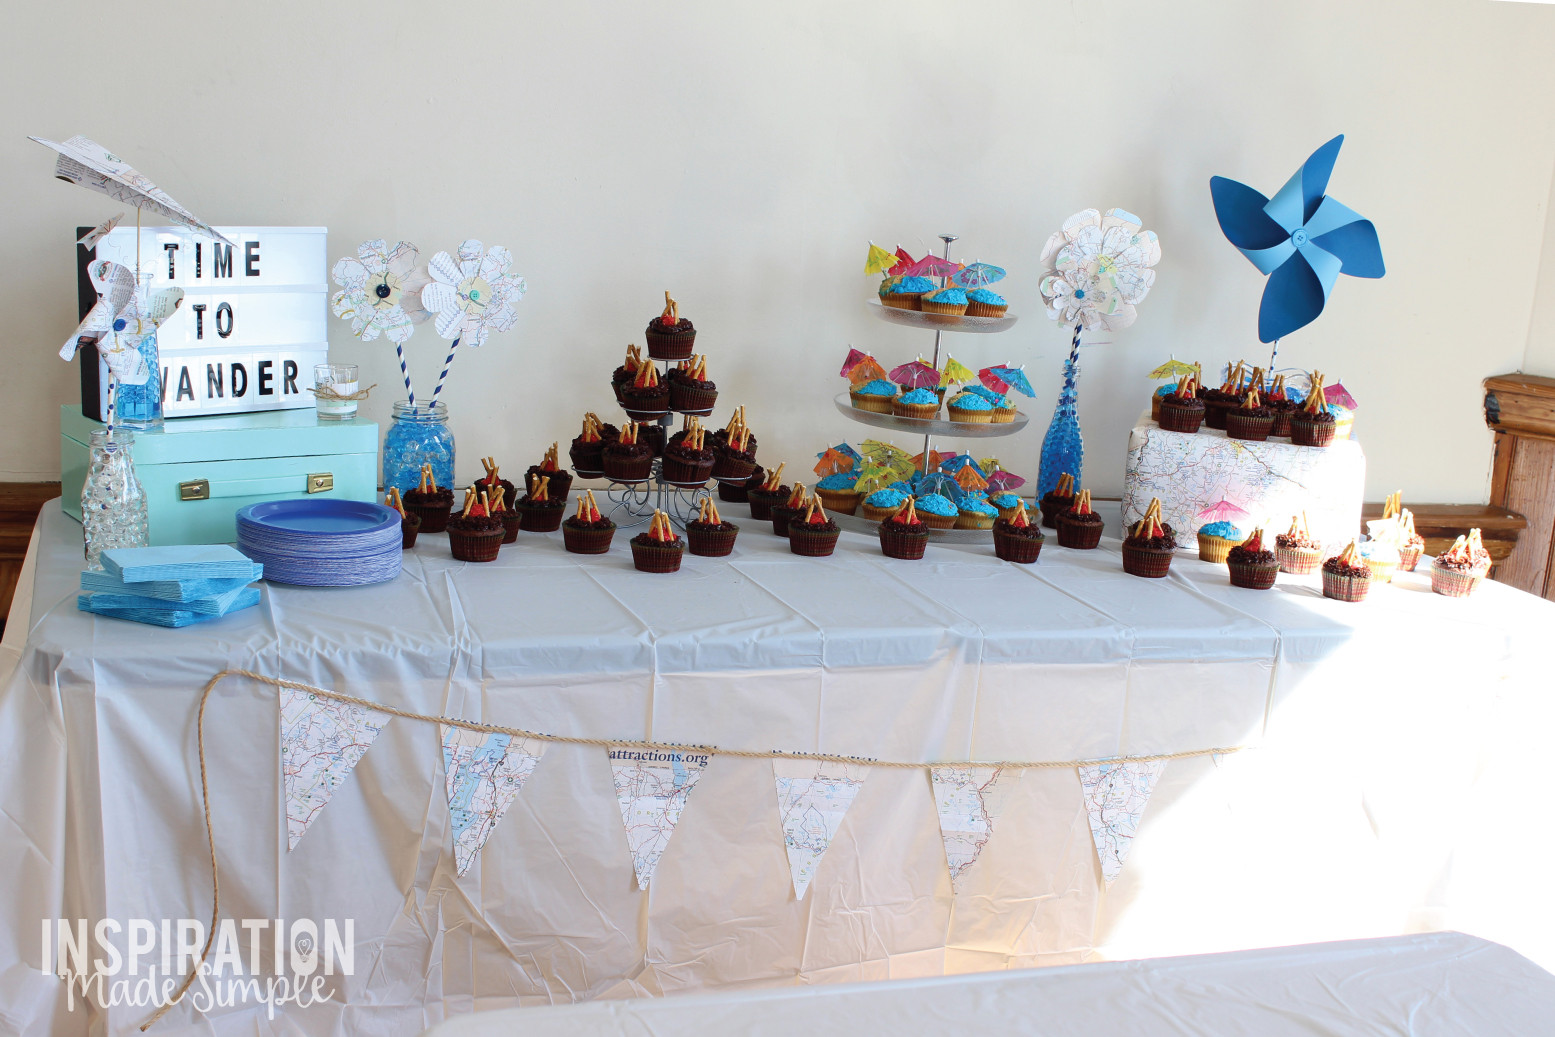 Beach Themed Retirement Party Ideas
 Time to Wander Retirement Party Inspiration Made Simple